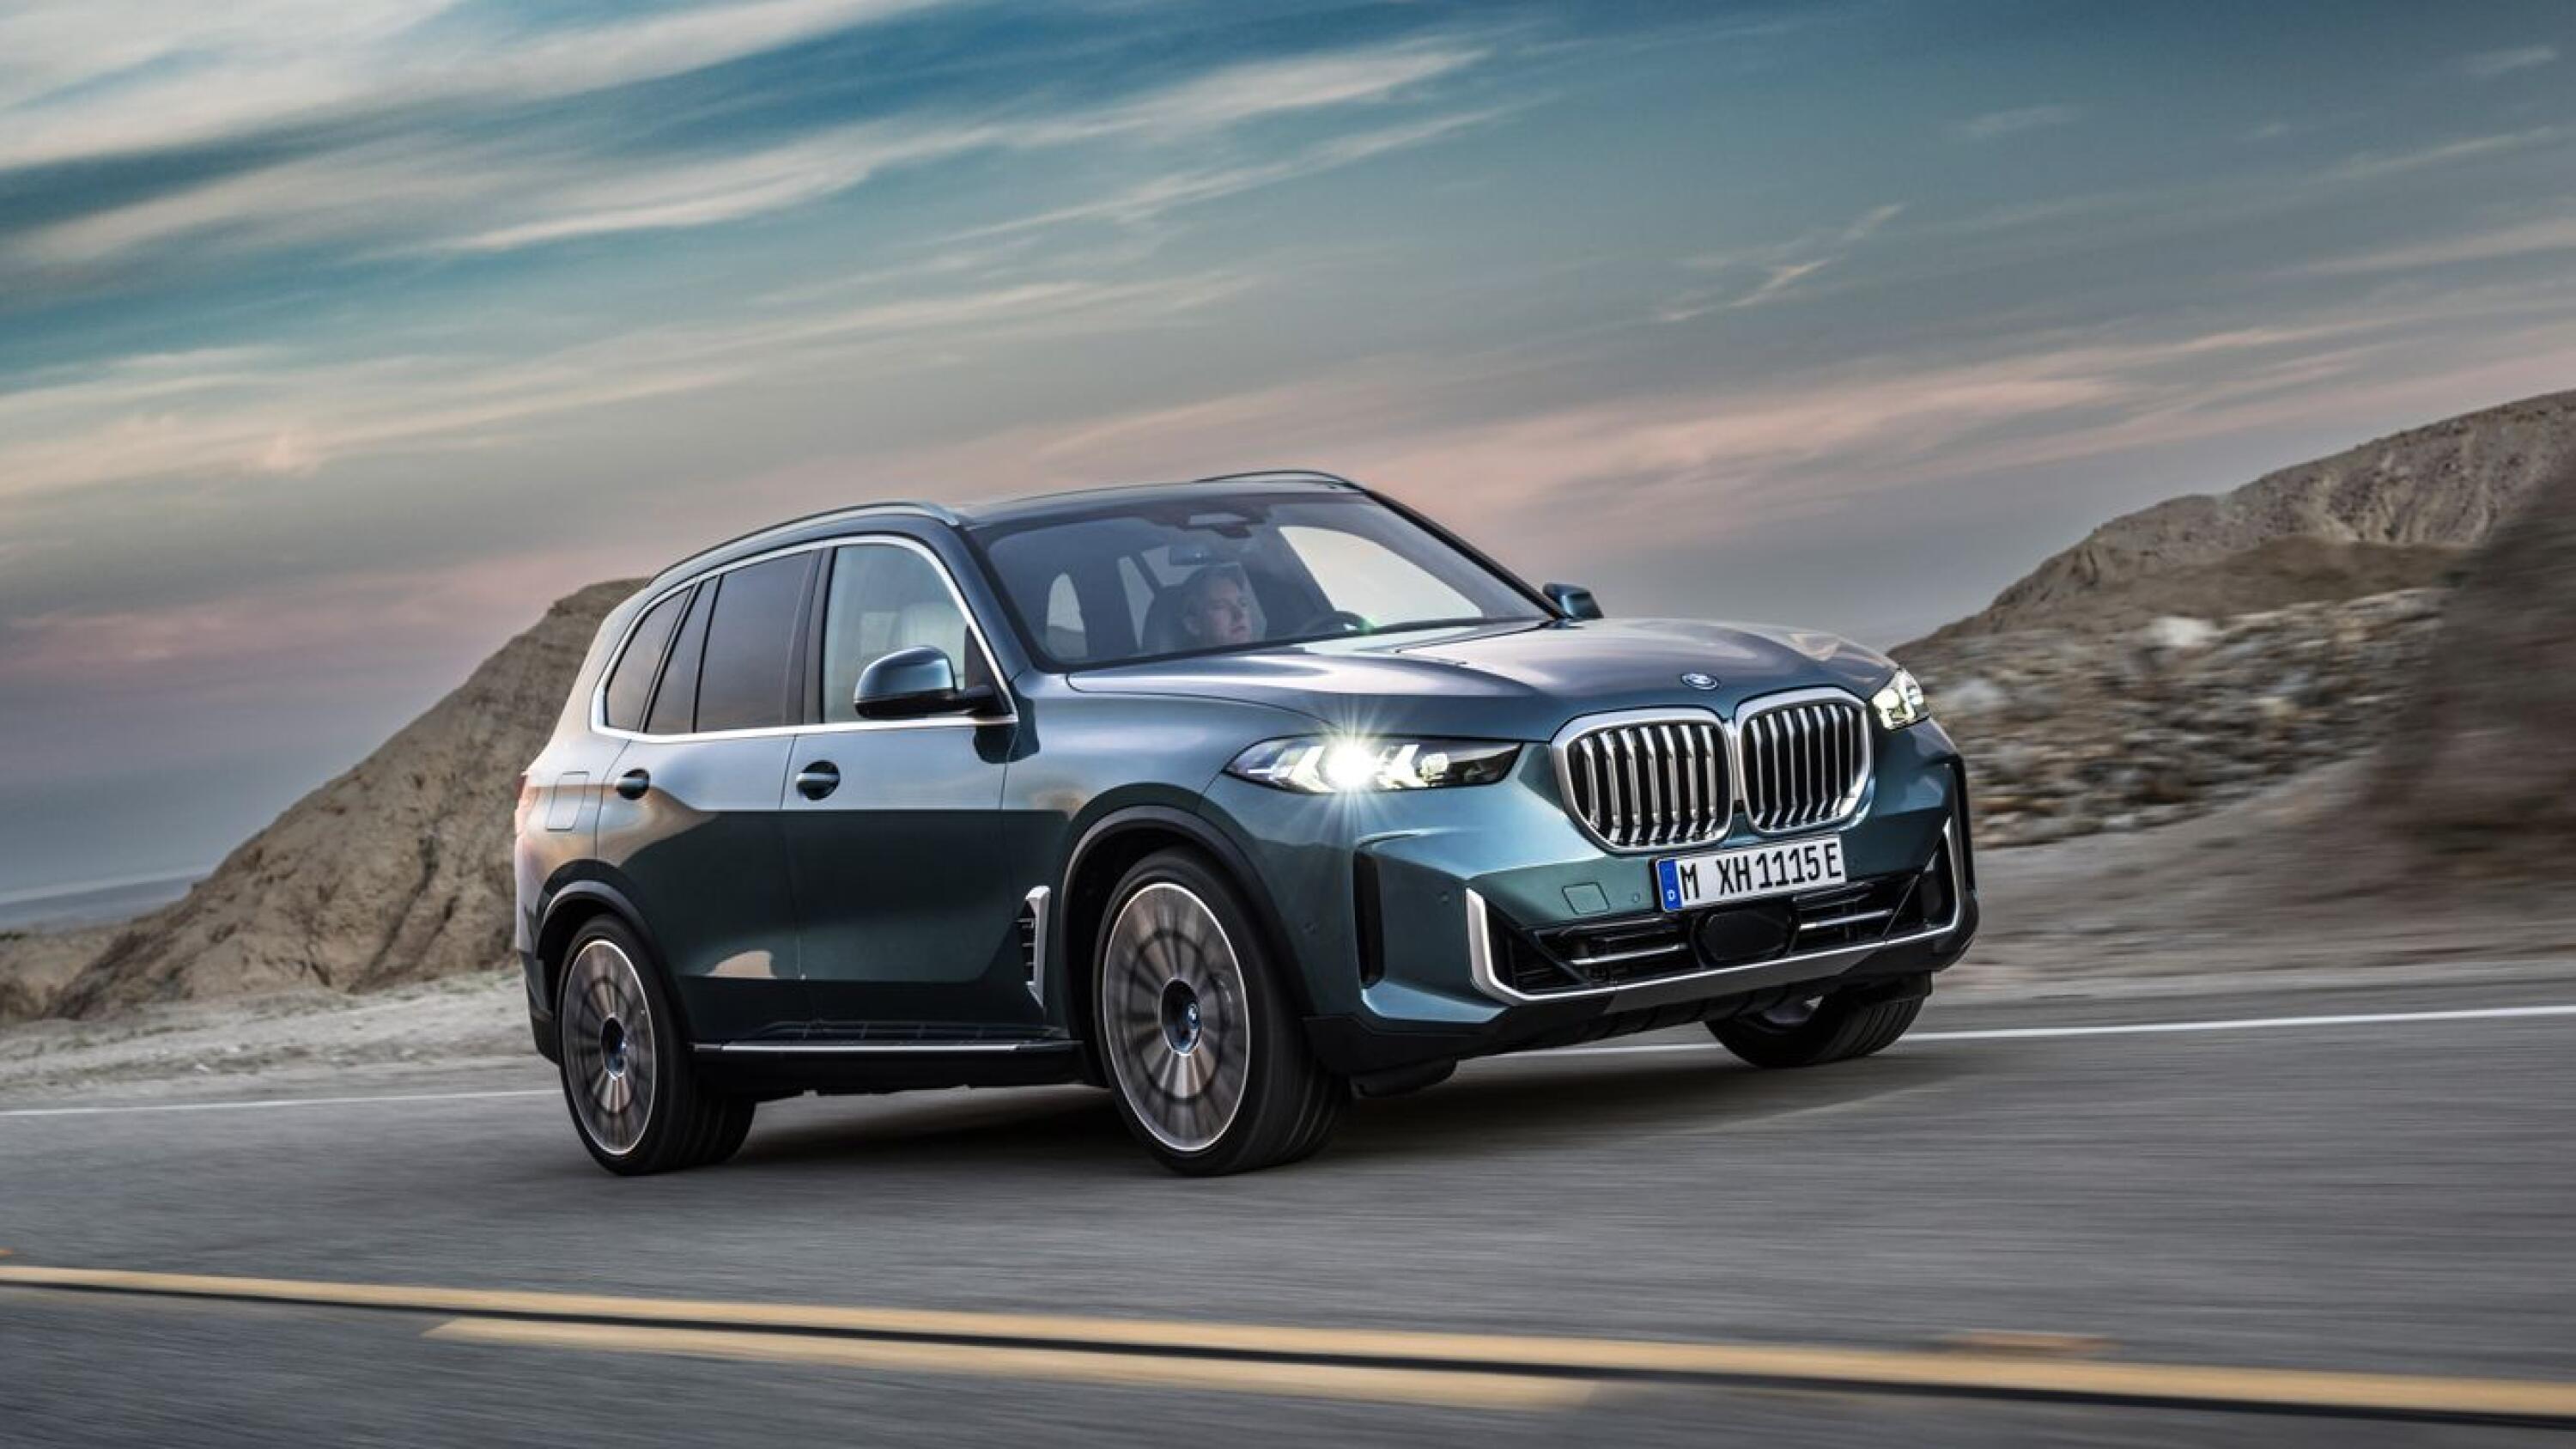 BMW promises its 530-horsepower X6 is not an SUV, it's just practical like  one